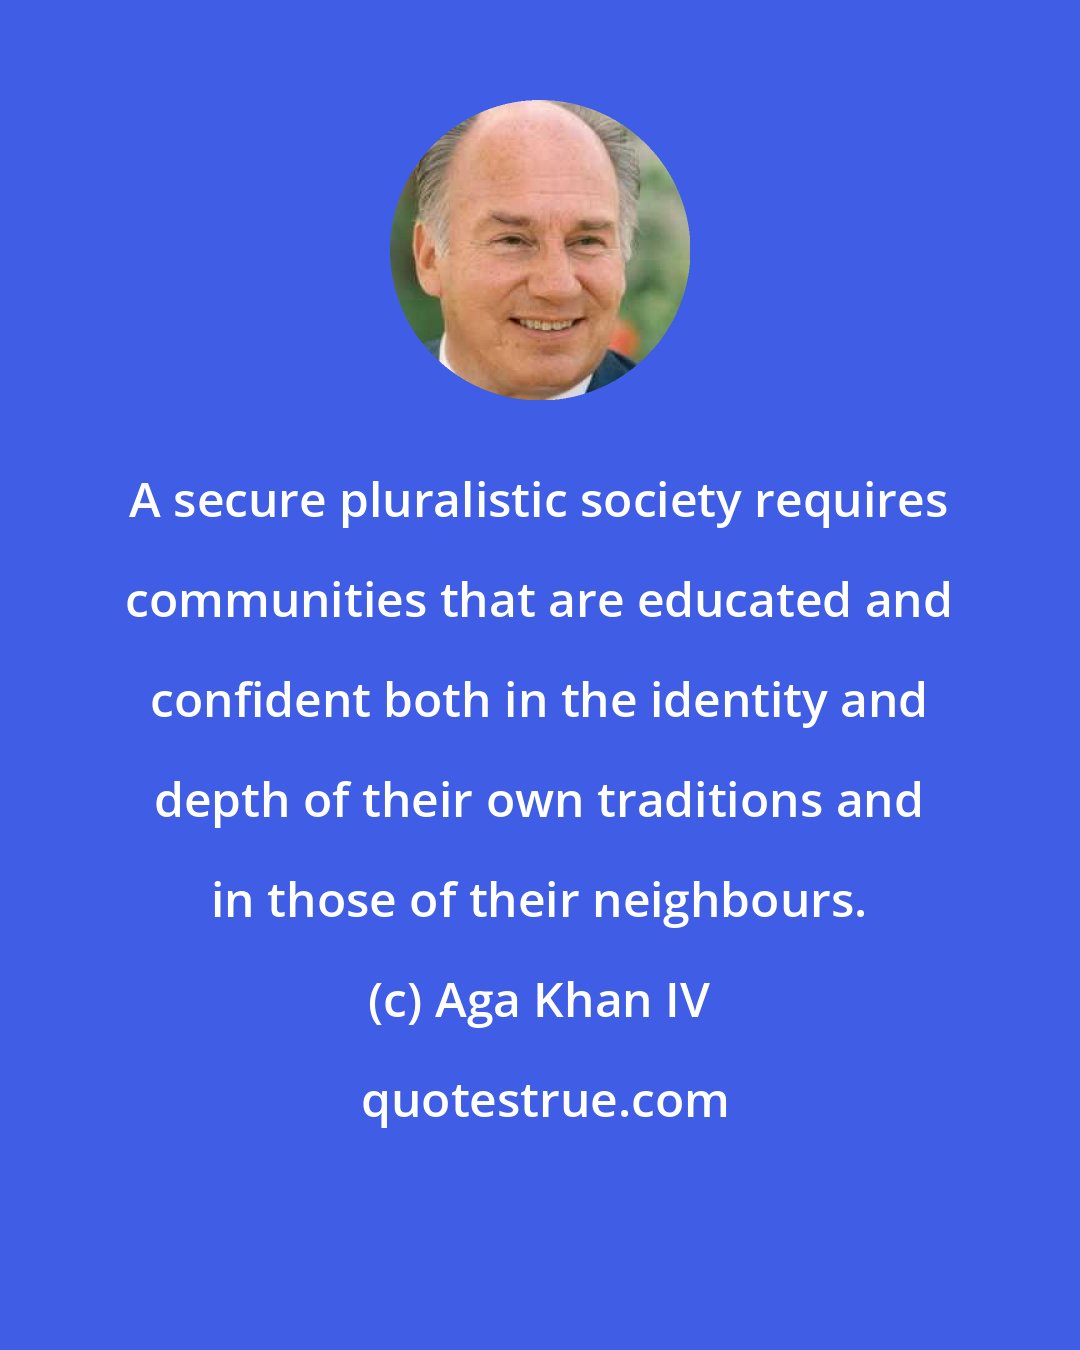 Aga Khan IV: A secure pluralistic society requires communities that are educated and confident both in the identity and depth of their own traditions and in those of their neighbours.